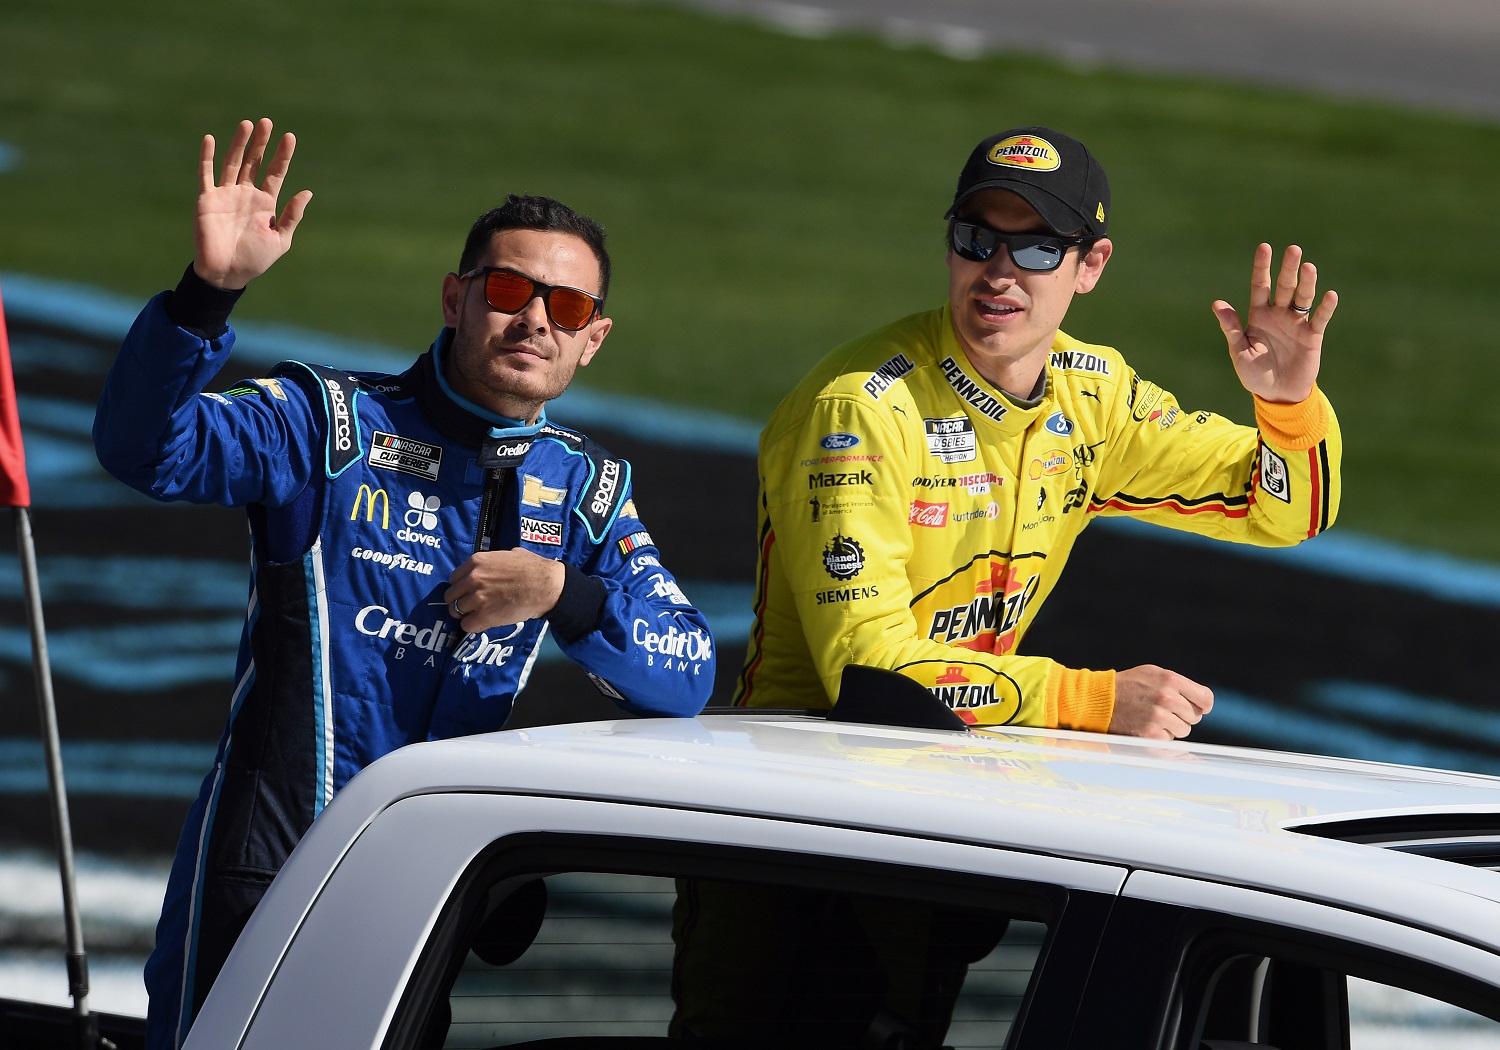 NASCAR Cup Series drivers Kyle Larson and Joey Logano wave to the fans during a parade lap before the Pennzoil 400 on Feb. 23, 2020, at Las Vegas Motor Speedway.